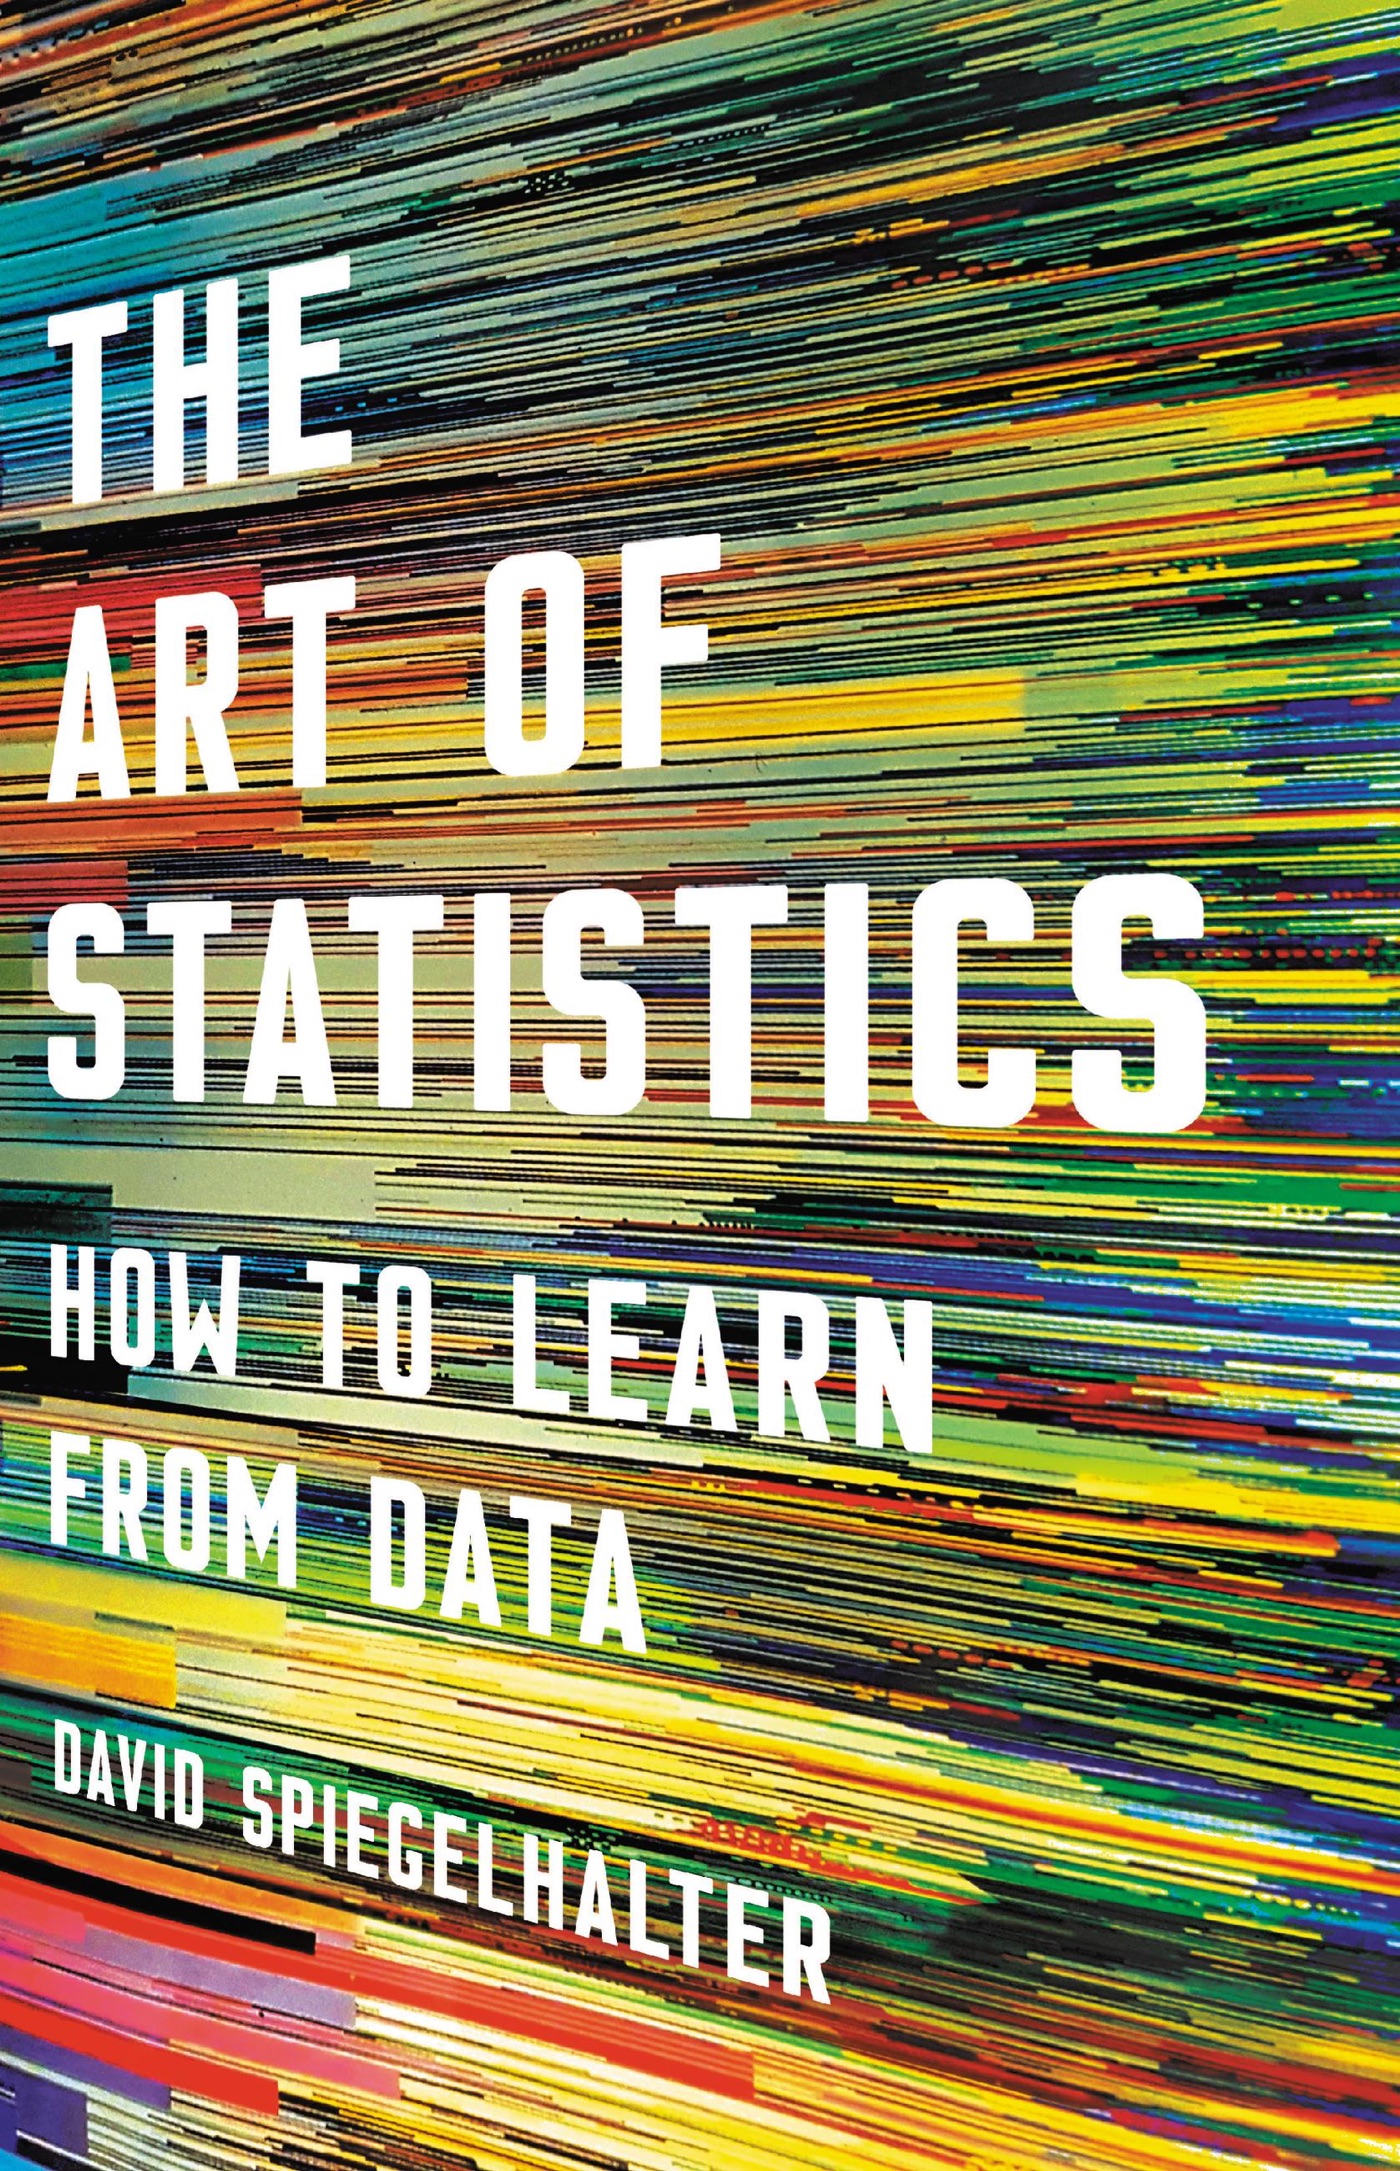 Book cover of "The Art of Statistics"